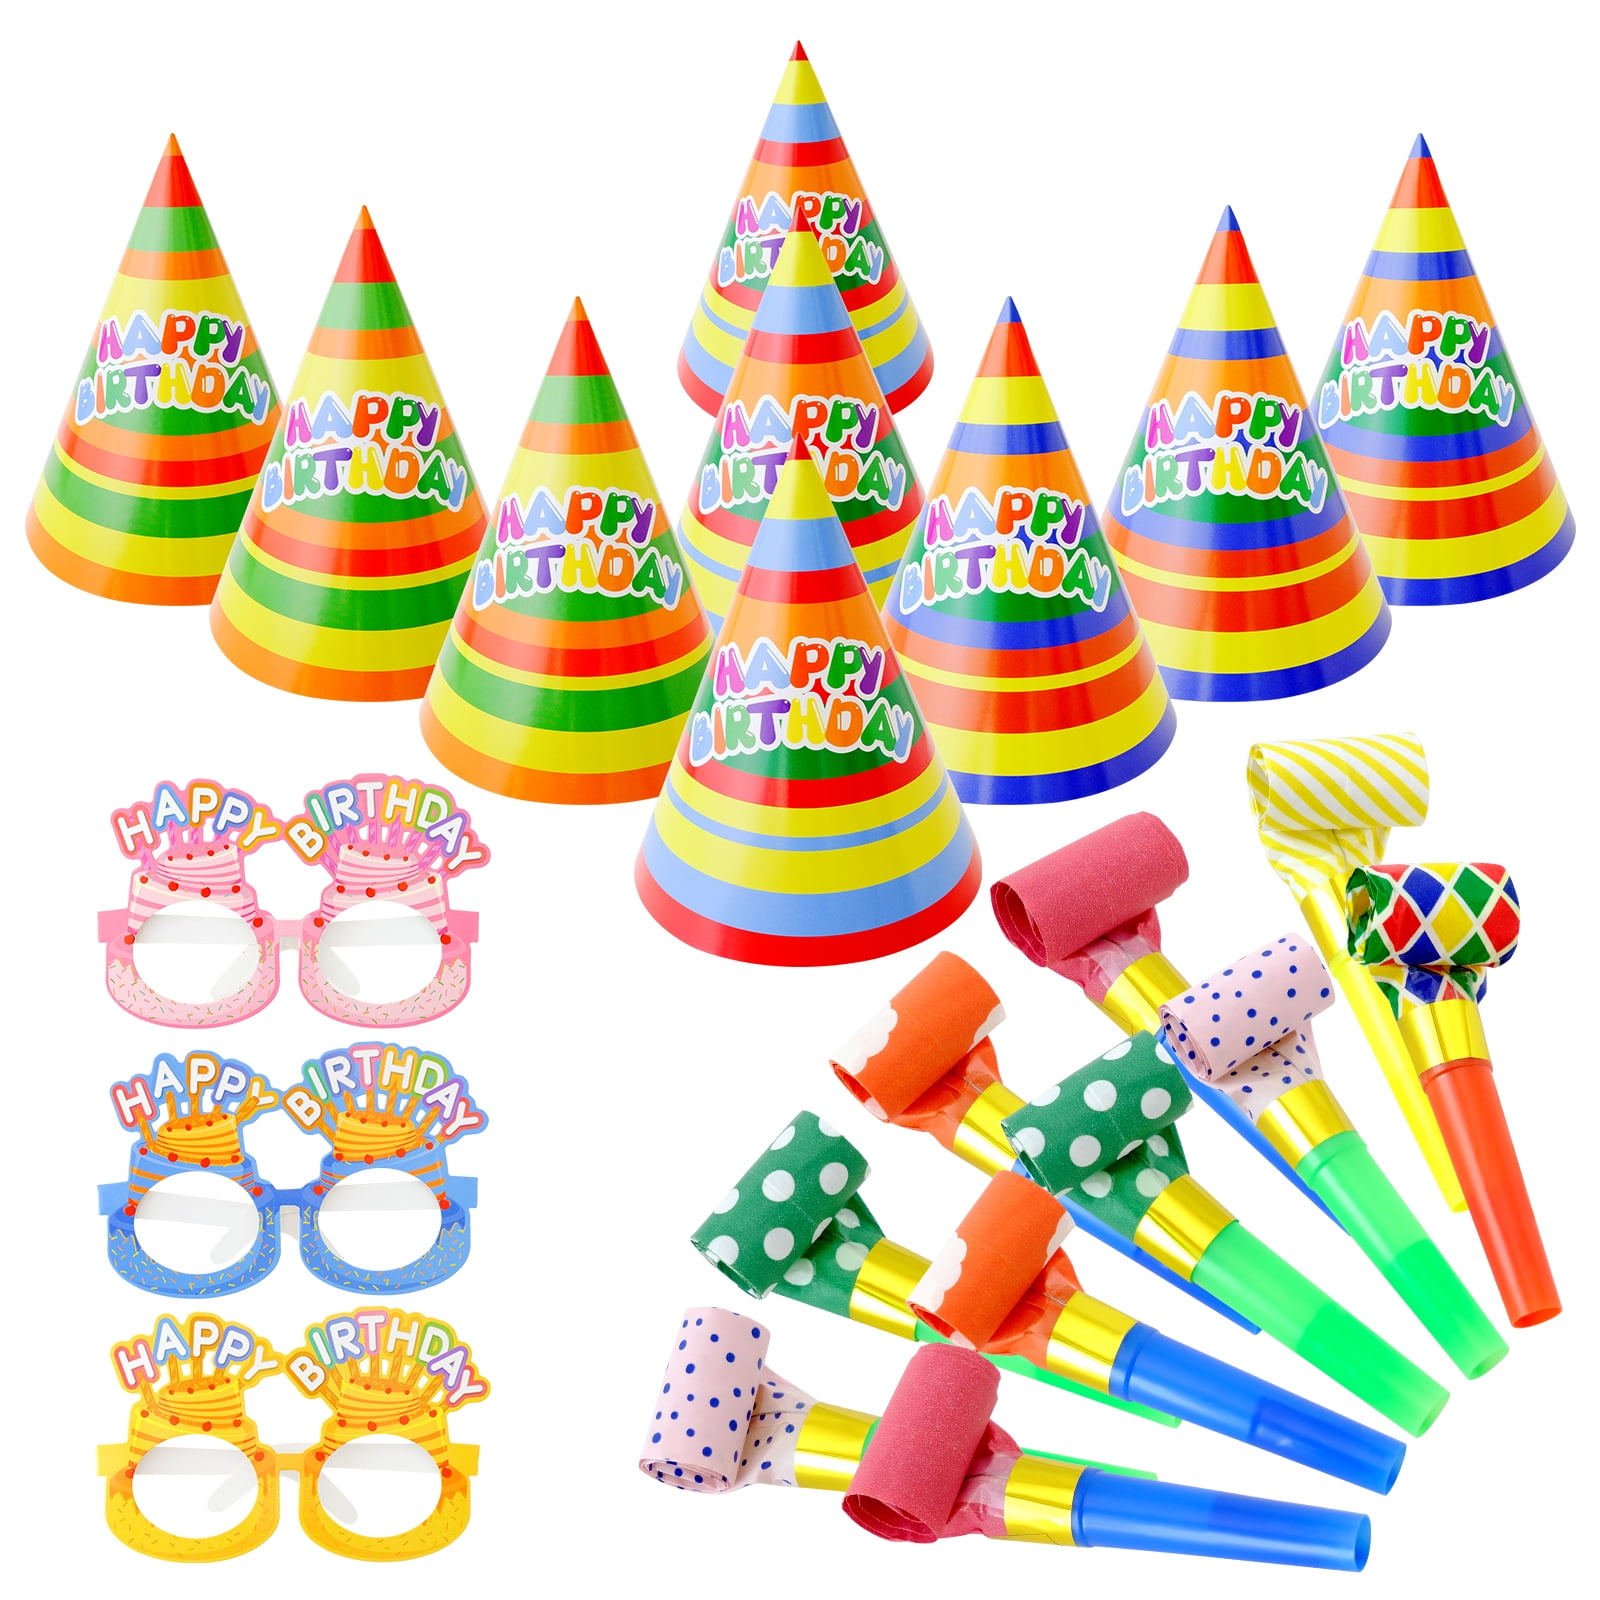 Abaodam Birthday Party Supplies Happy Birthday Picture Cutouts